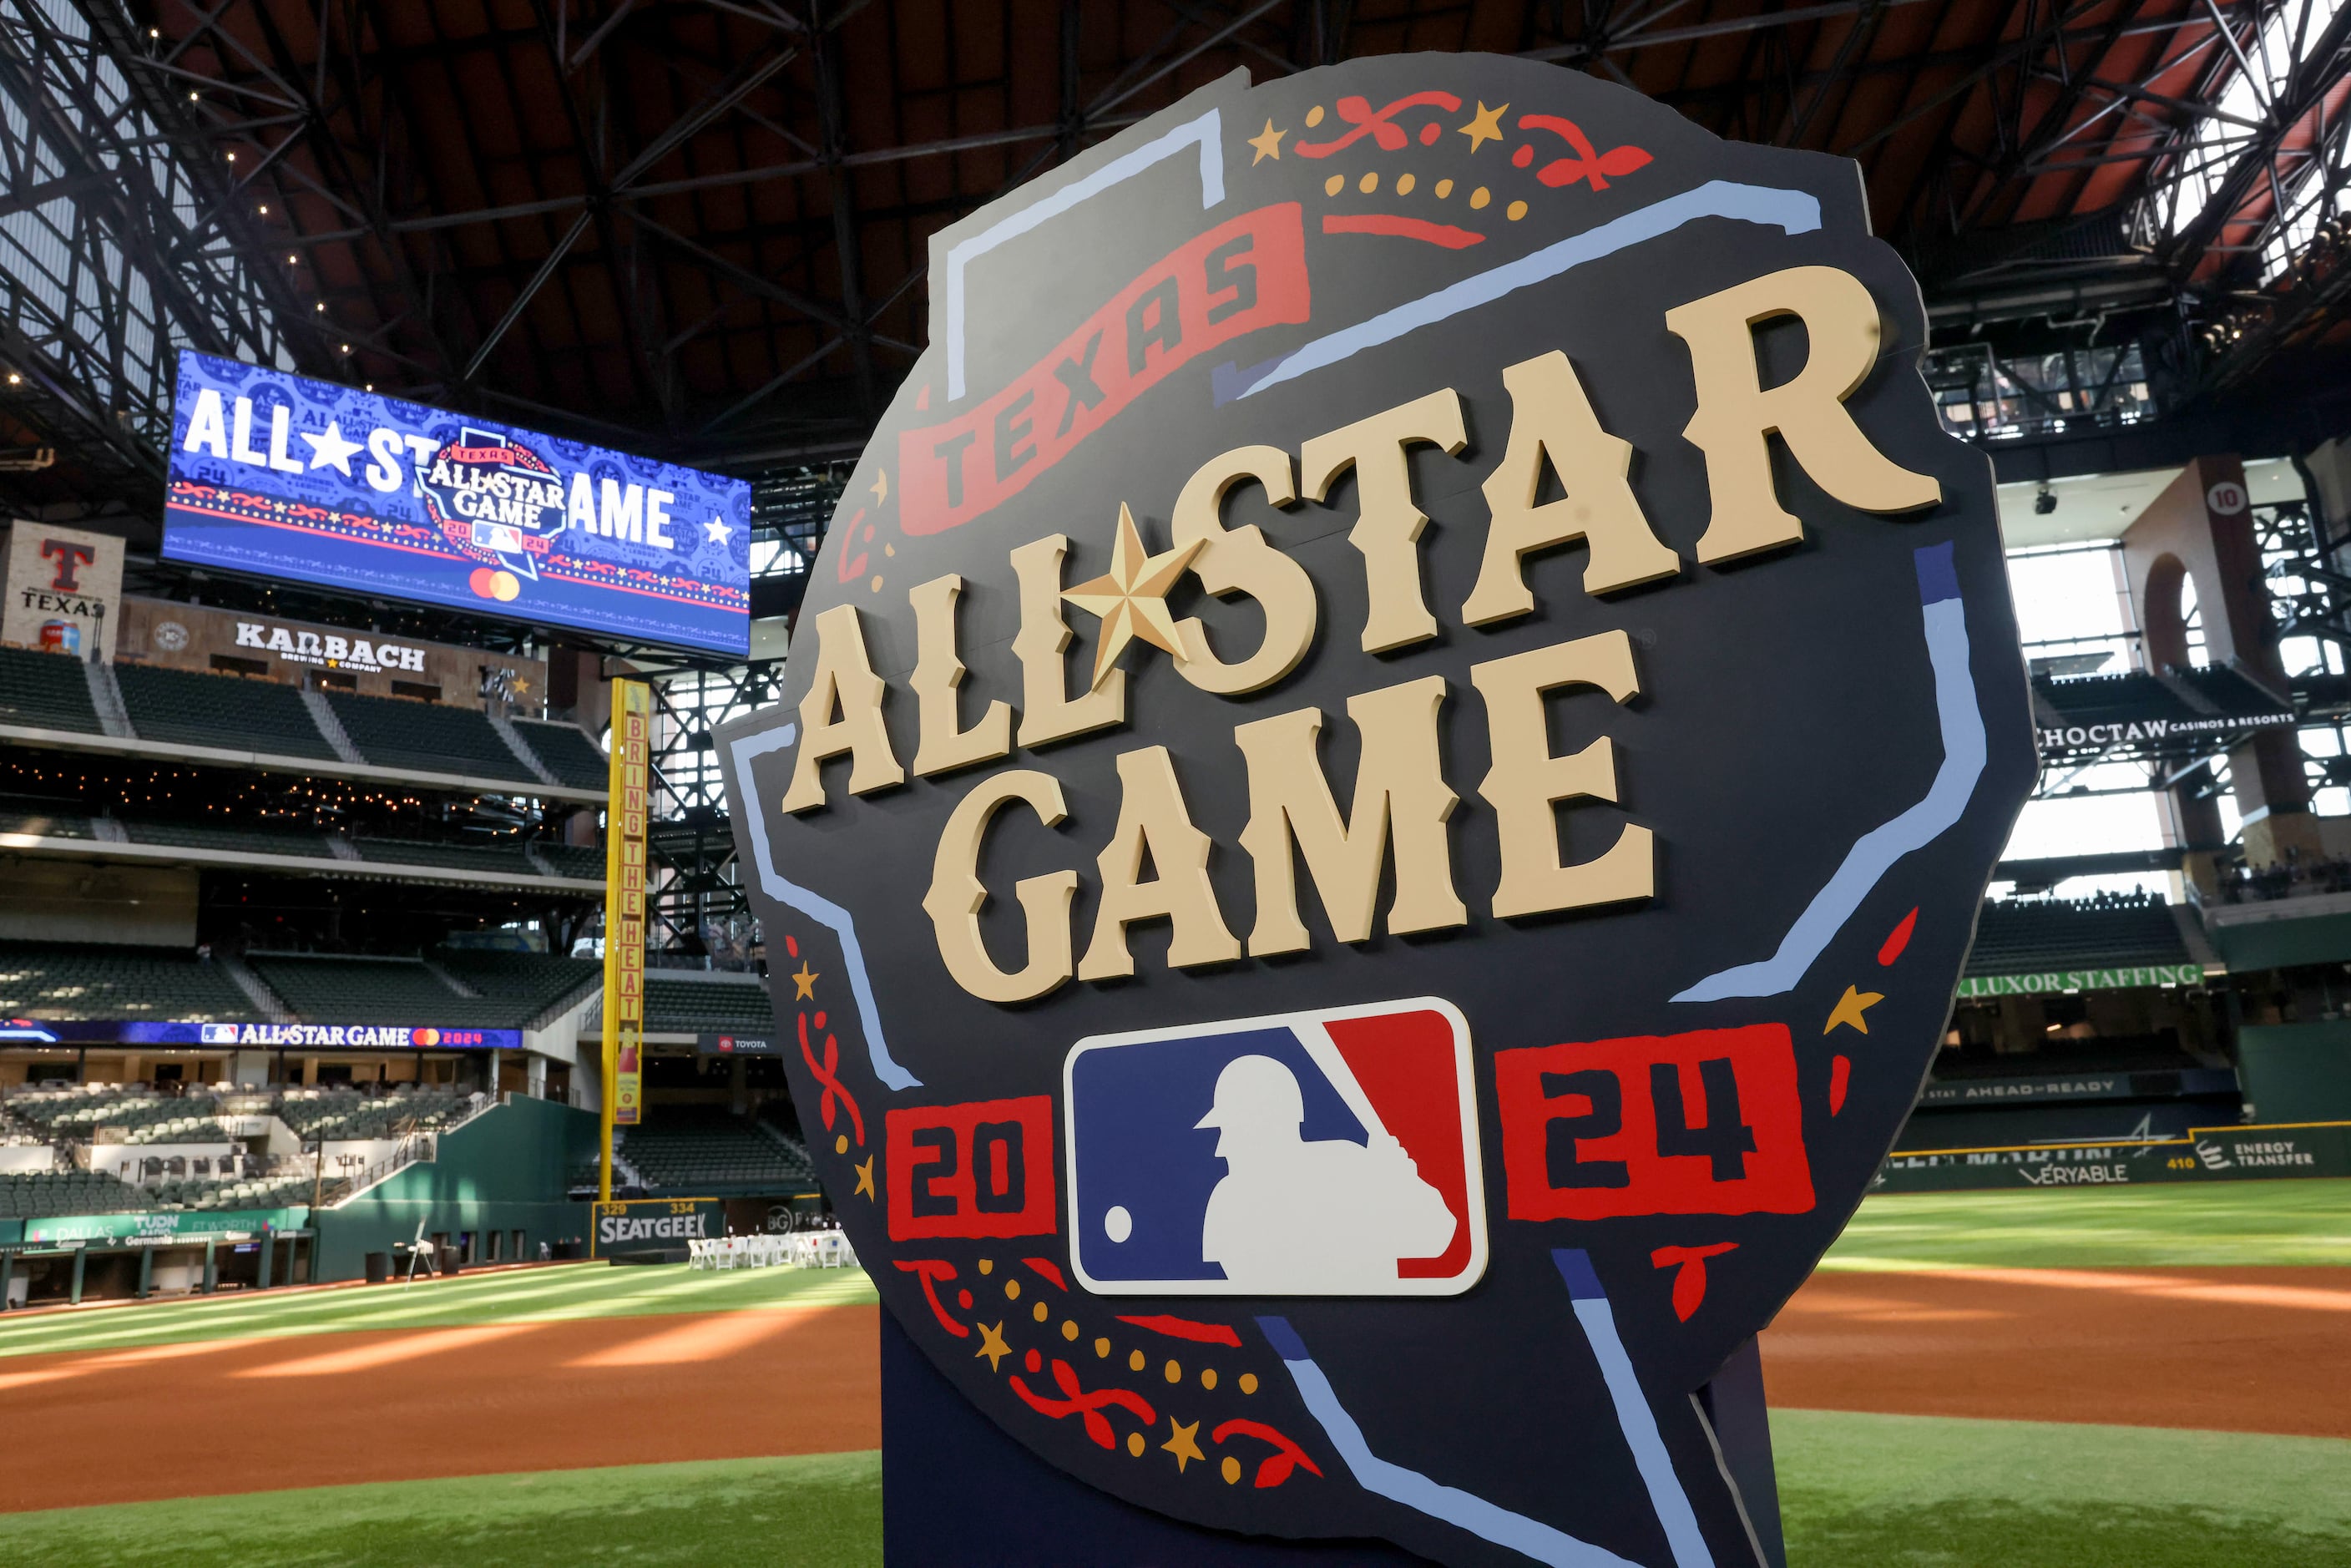 2023 MLB All-Star Game starters unveiled